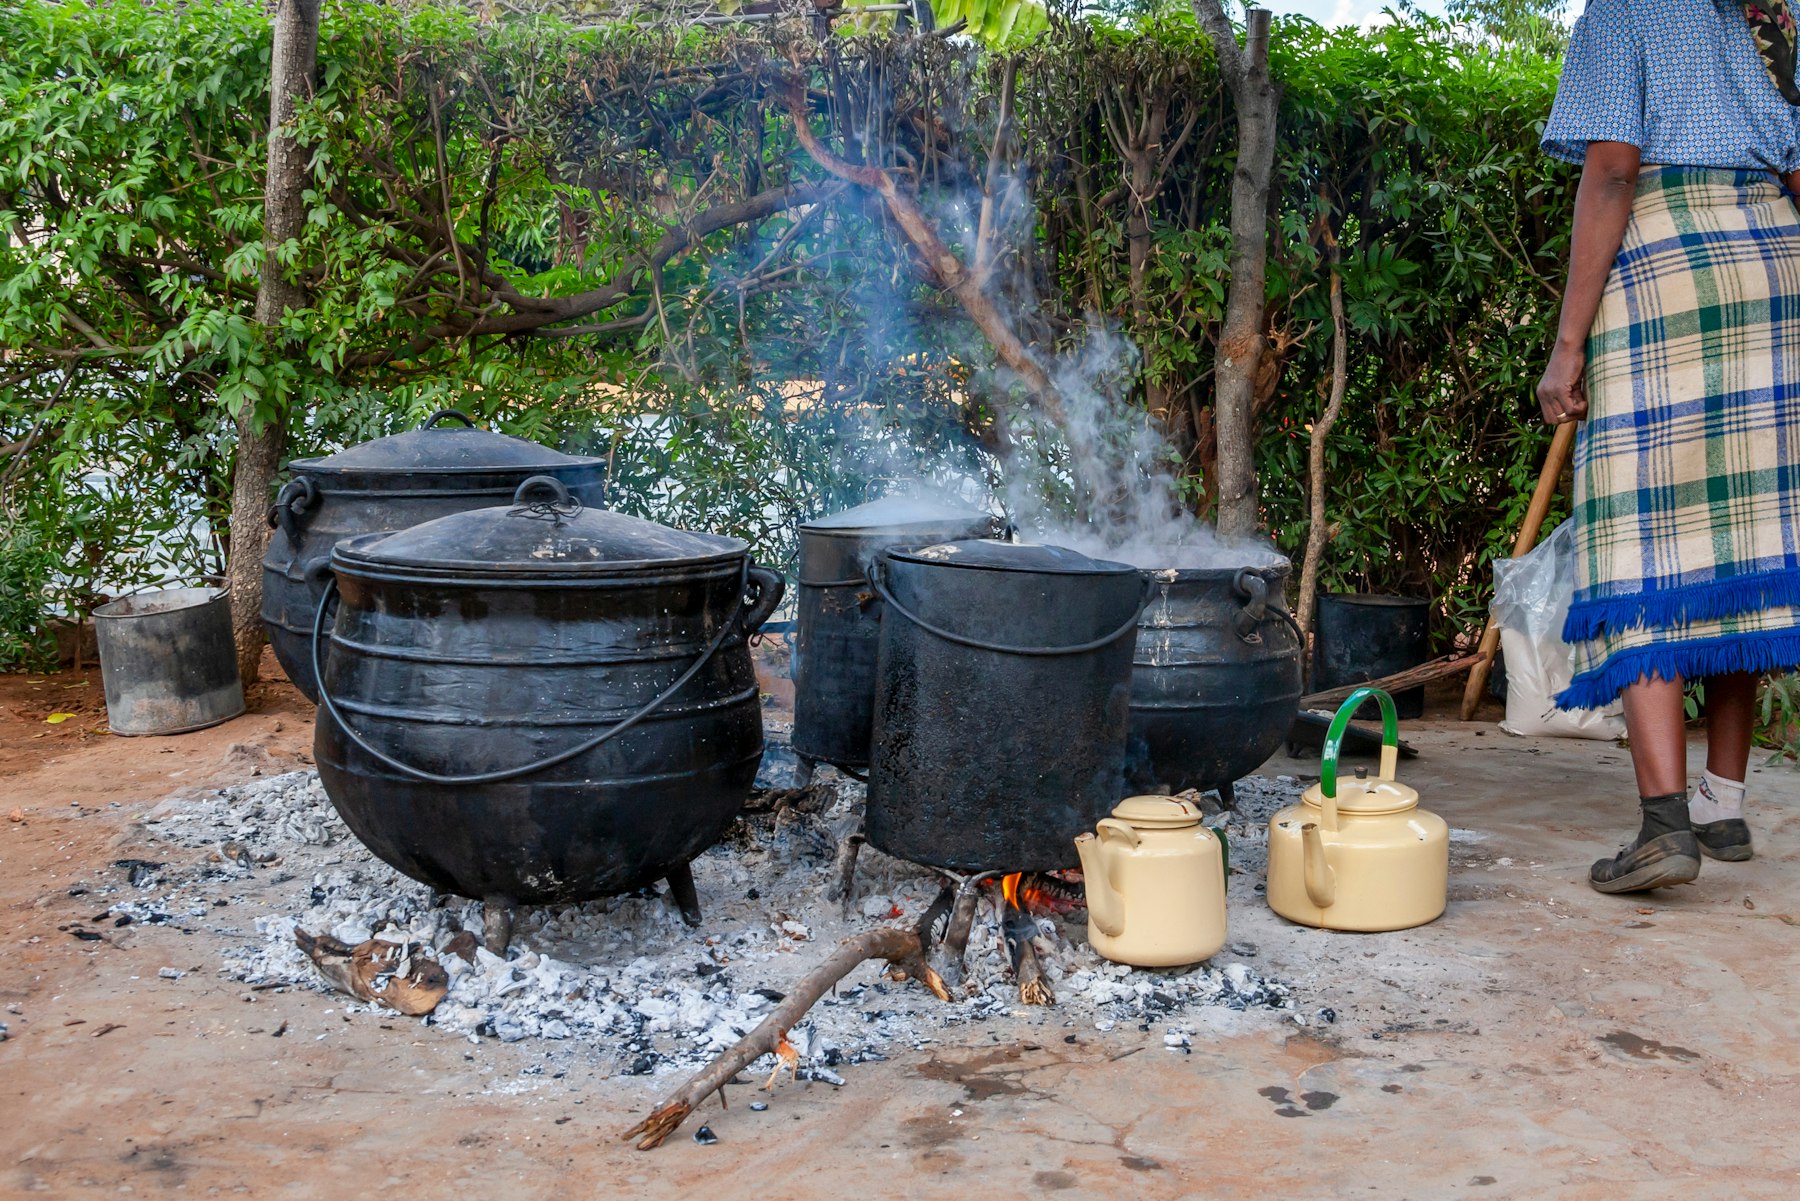 Photo depicts a woman cooking using four black cauldrons over an ashy and wood filled fire